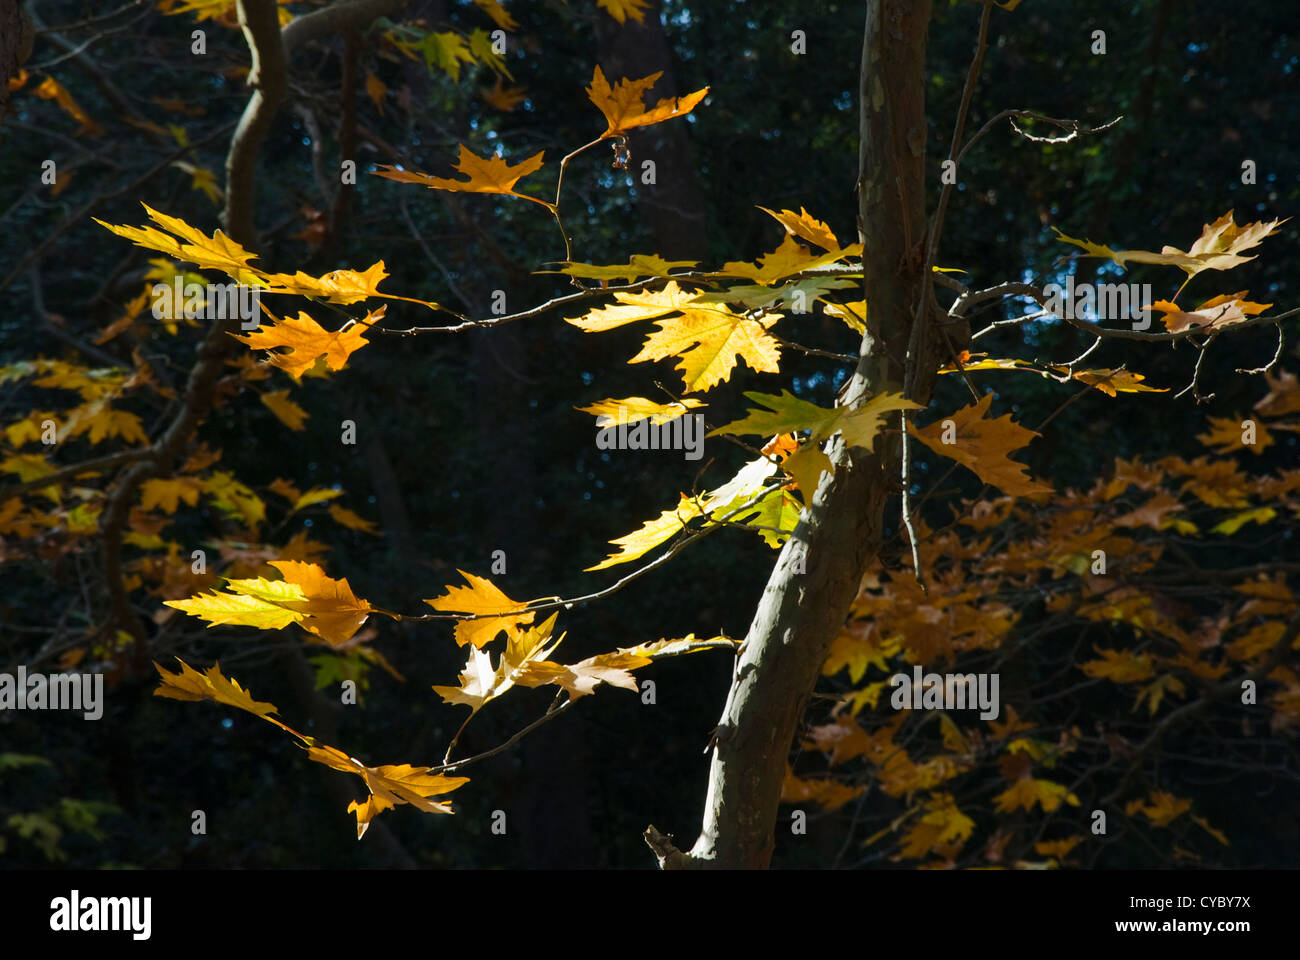 Twigs of a plane tree with backlit autumn foliage Stock Photo